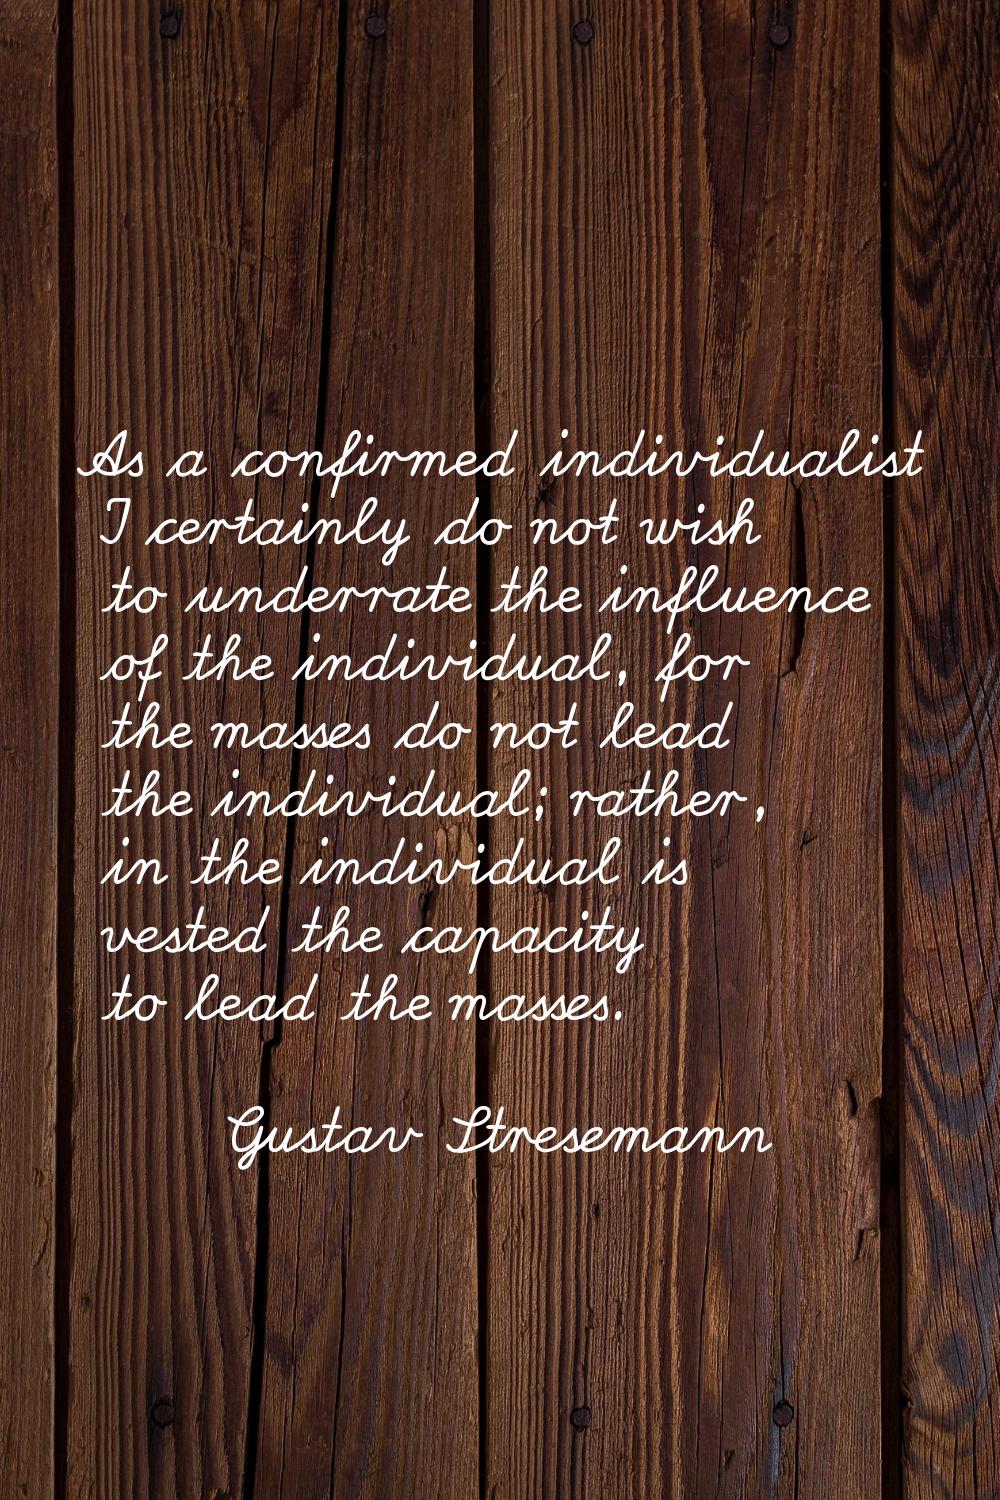 As a confirmed individualist I certainly do not wish to underrate the influence of the individual, 